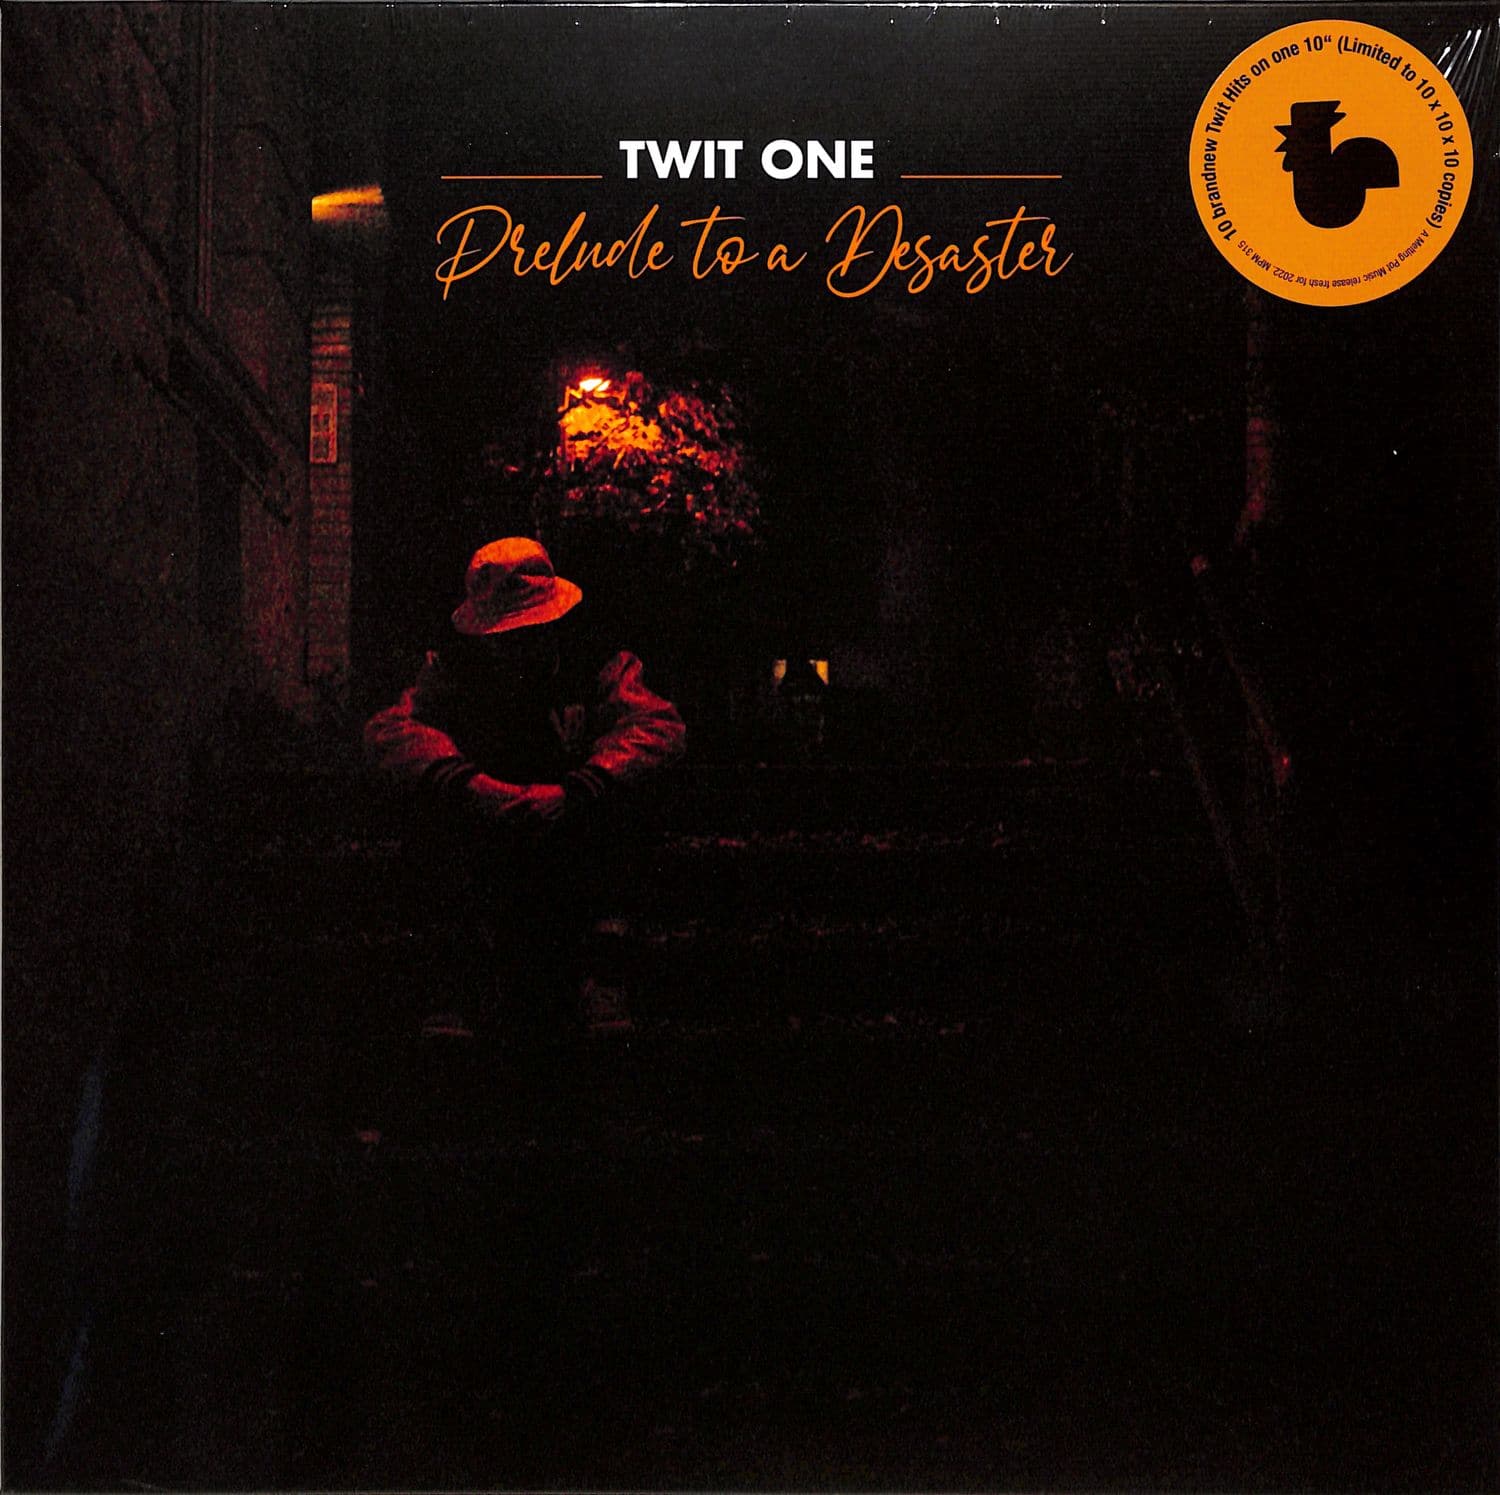 Twit One - PRELUDE TO A DESASTER 